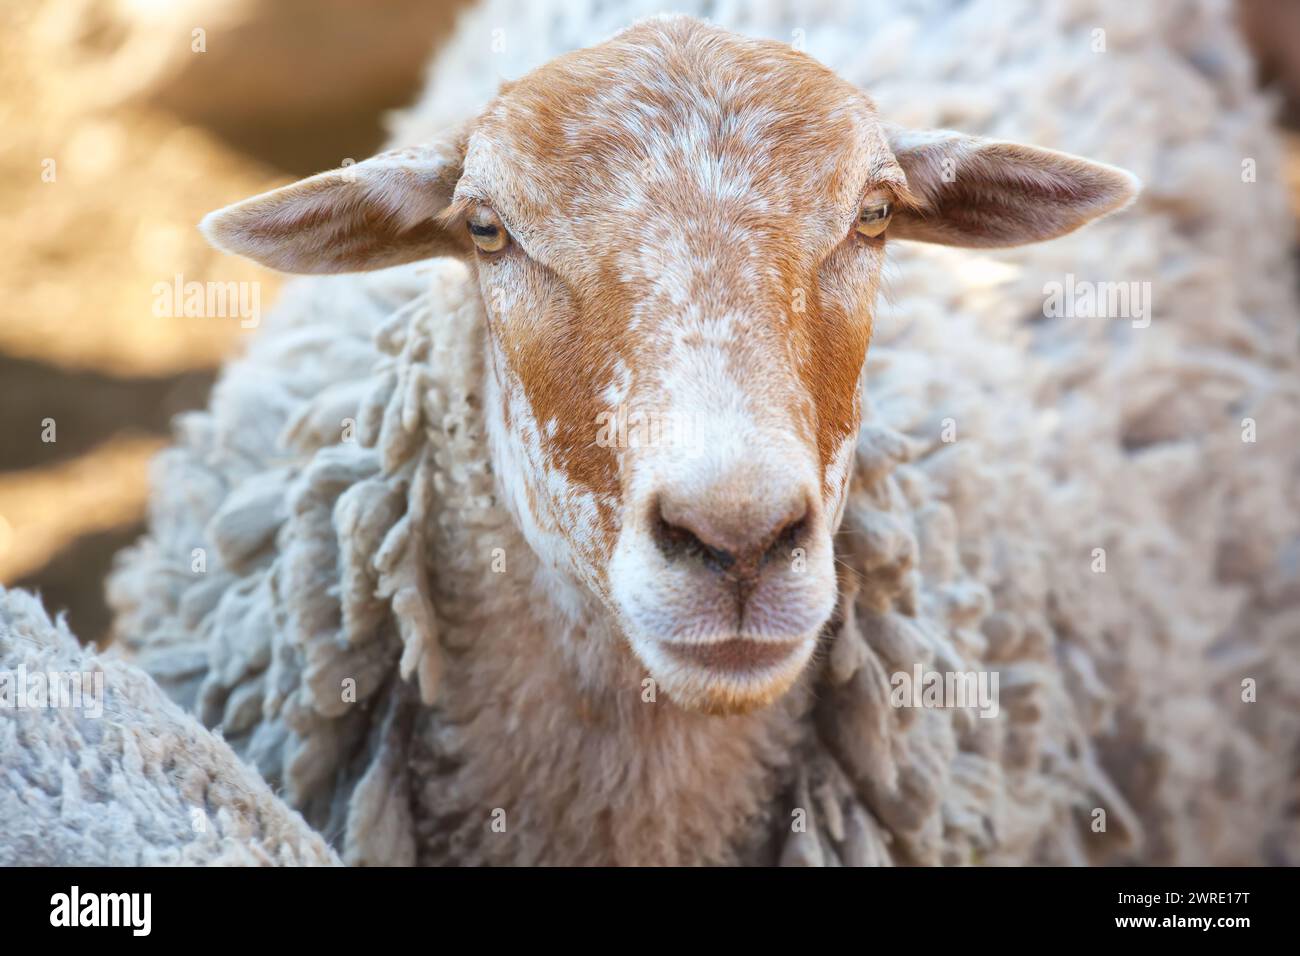 sheep in the corral for cattle and sleeping after a walk in a pasture. Breeding animals on the farm. Stock Photo